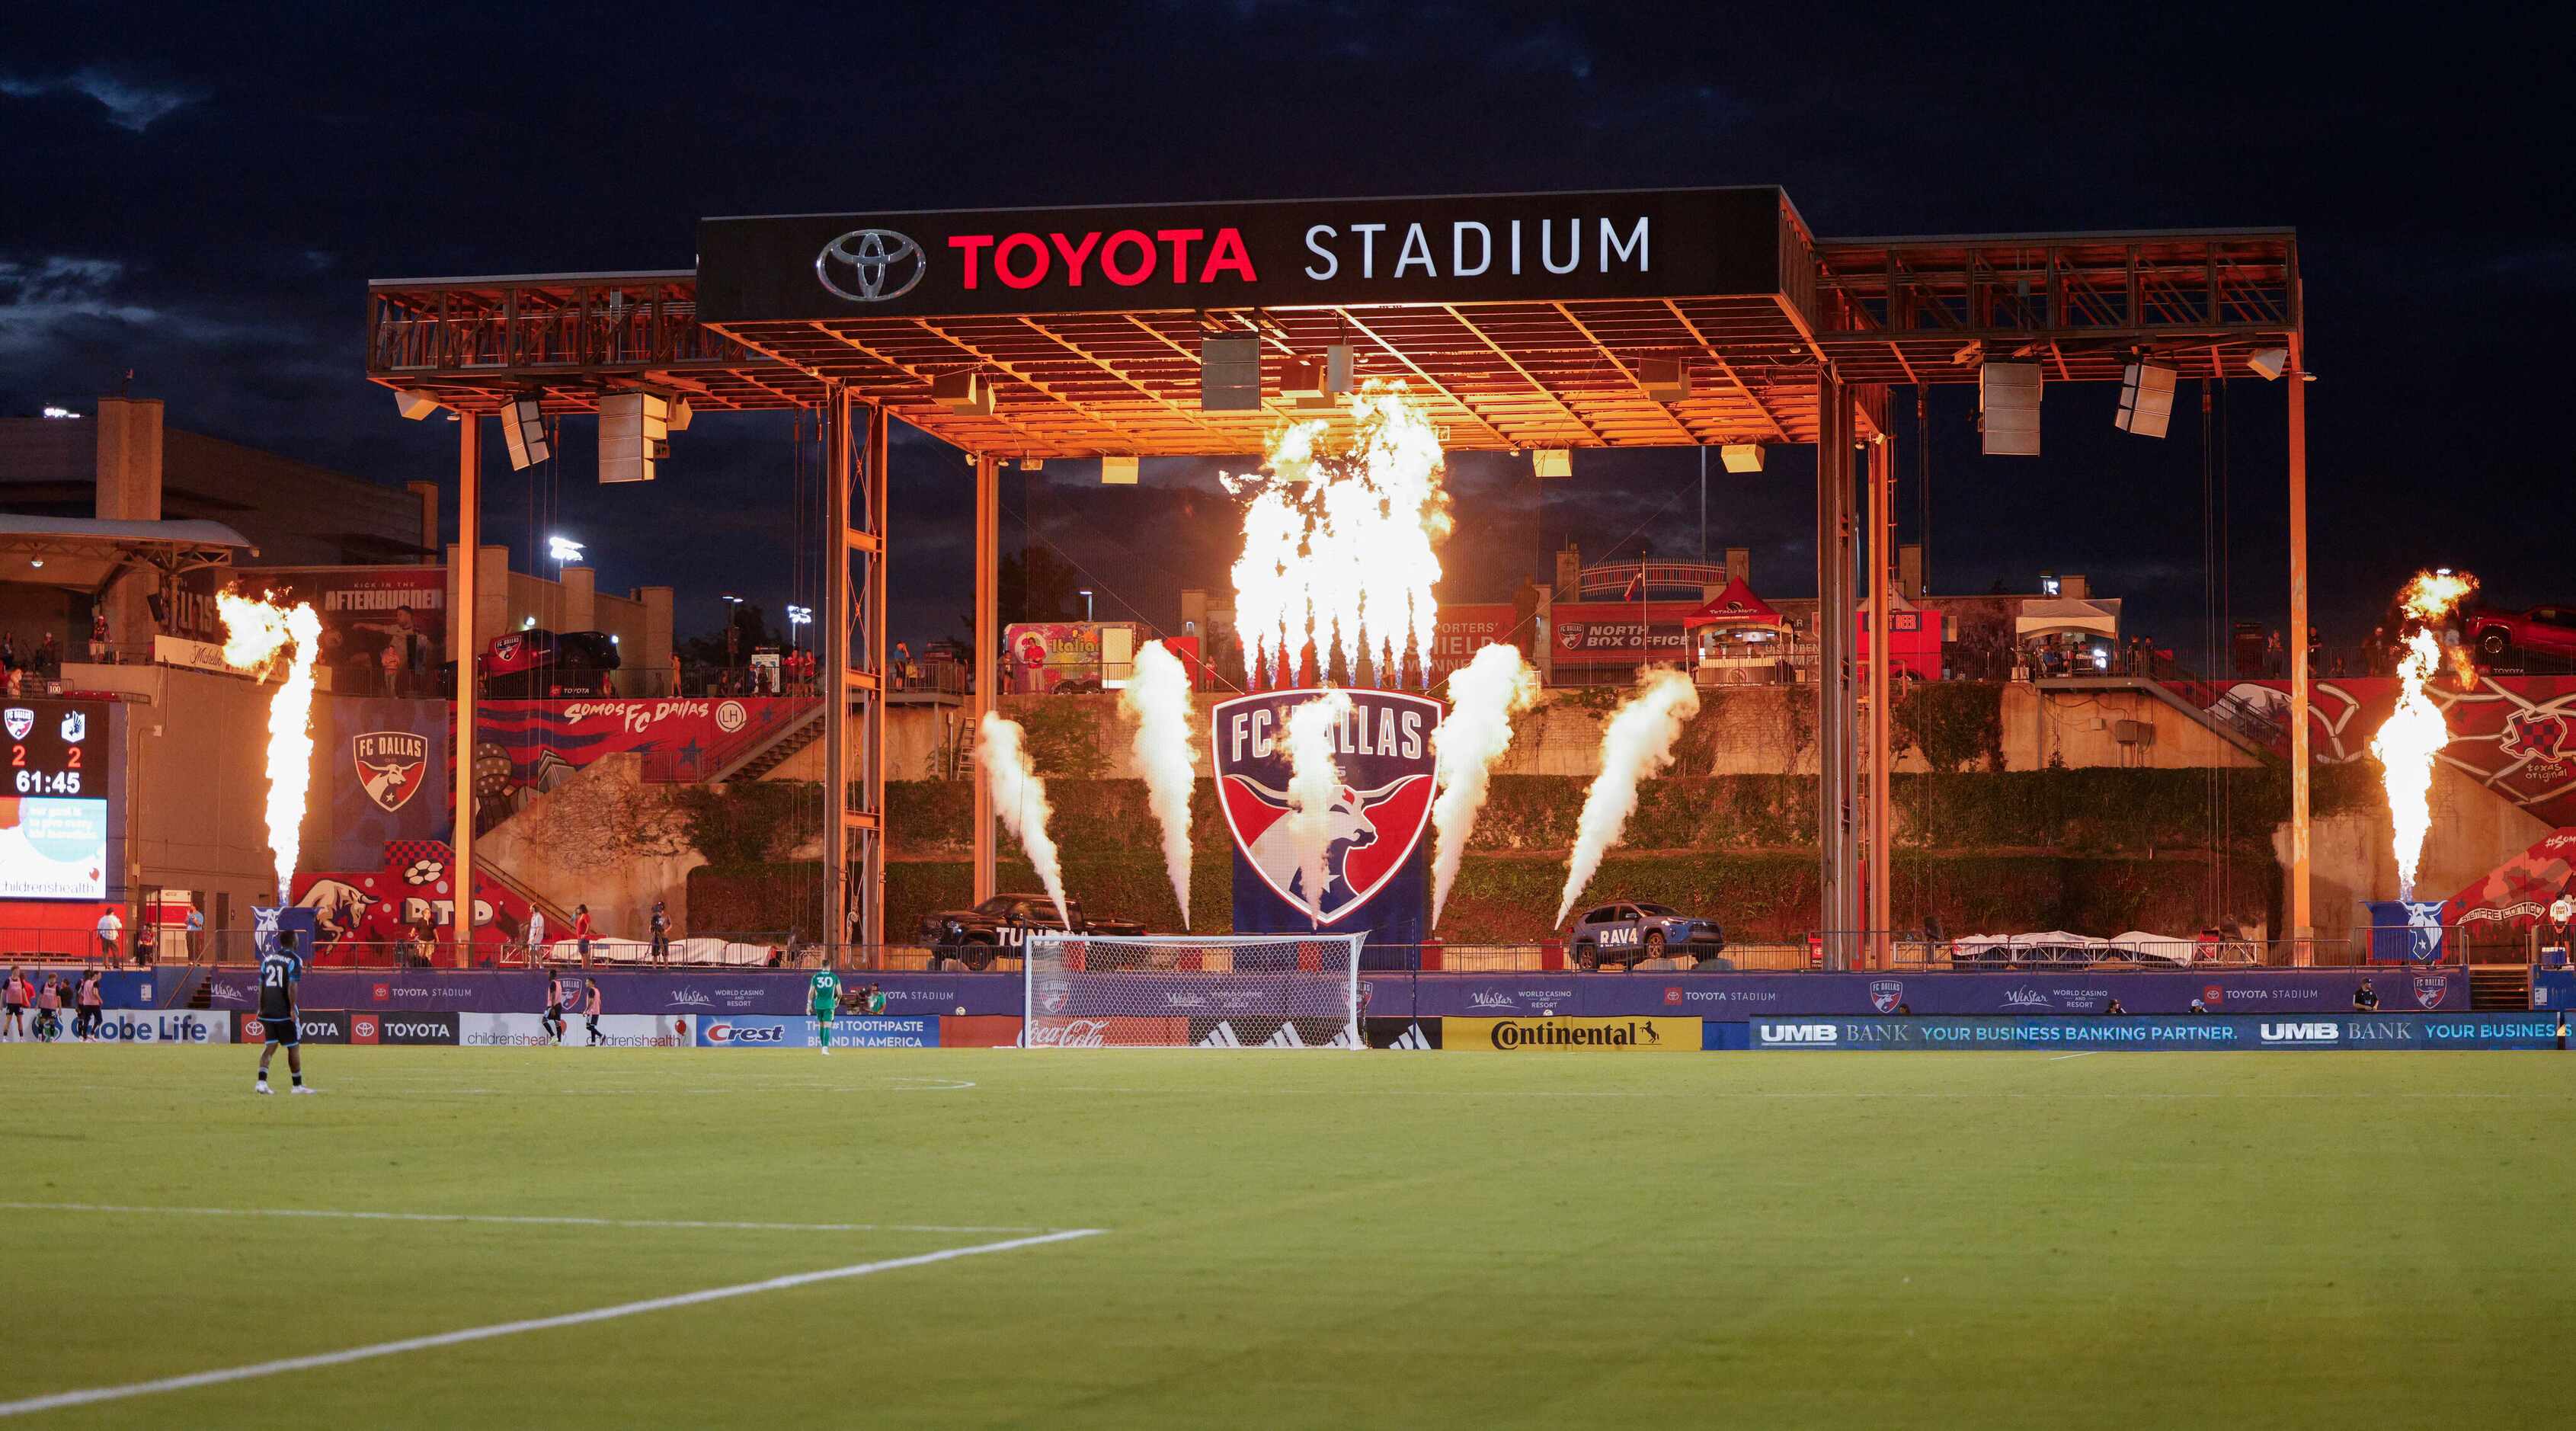 Flames shoot into the air after a goal by FC Dallas forward Petar Musa during the second...